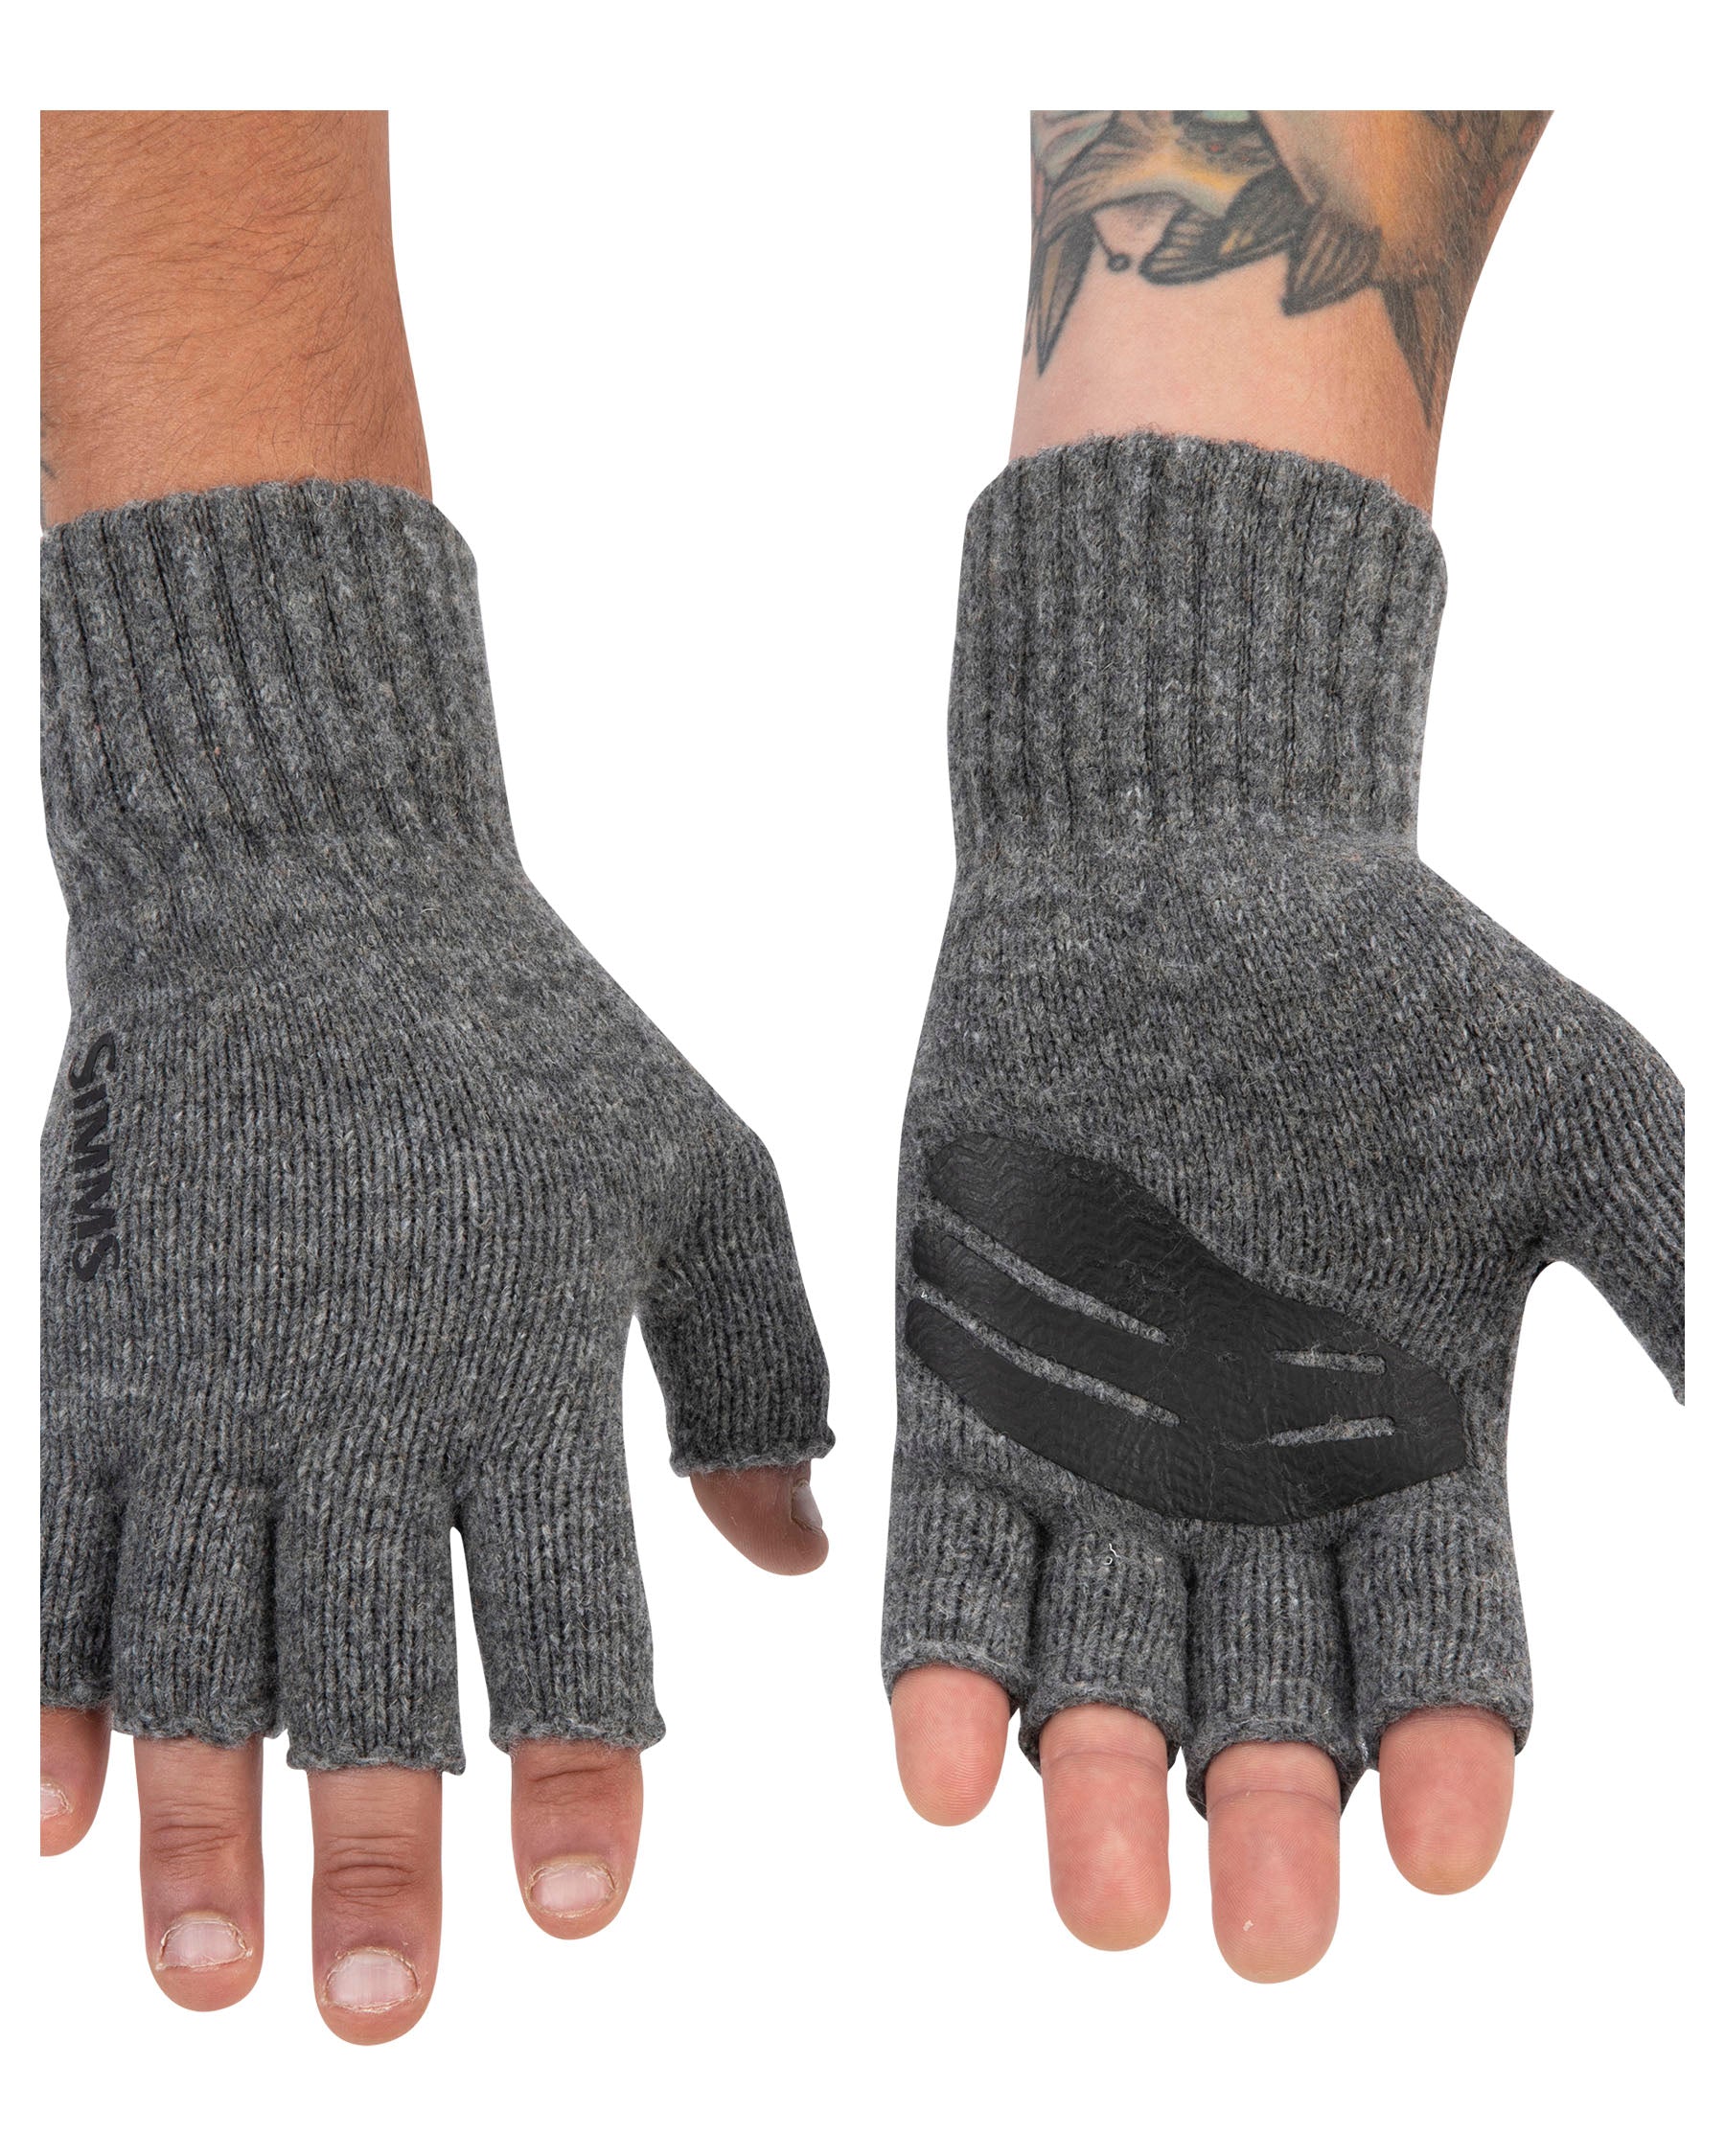 Wool Half-Finger Glove | Simms Fishing Products